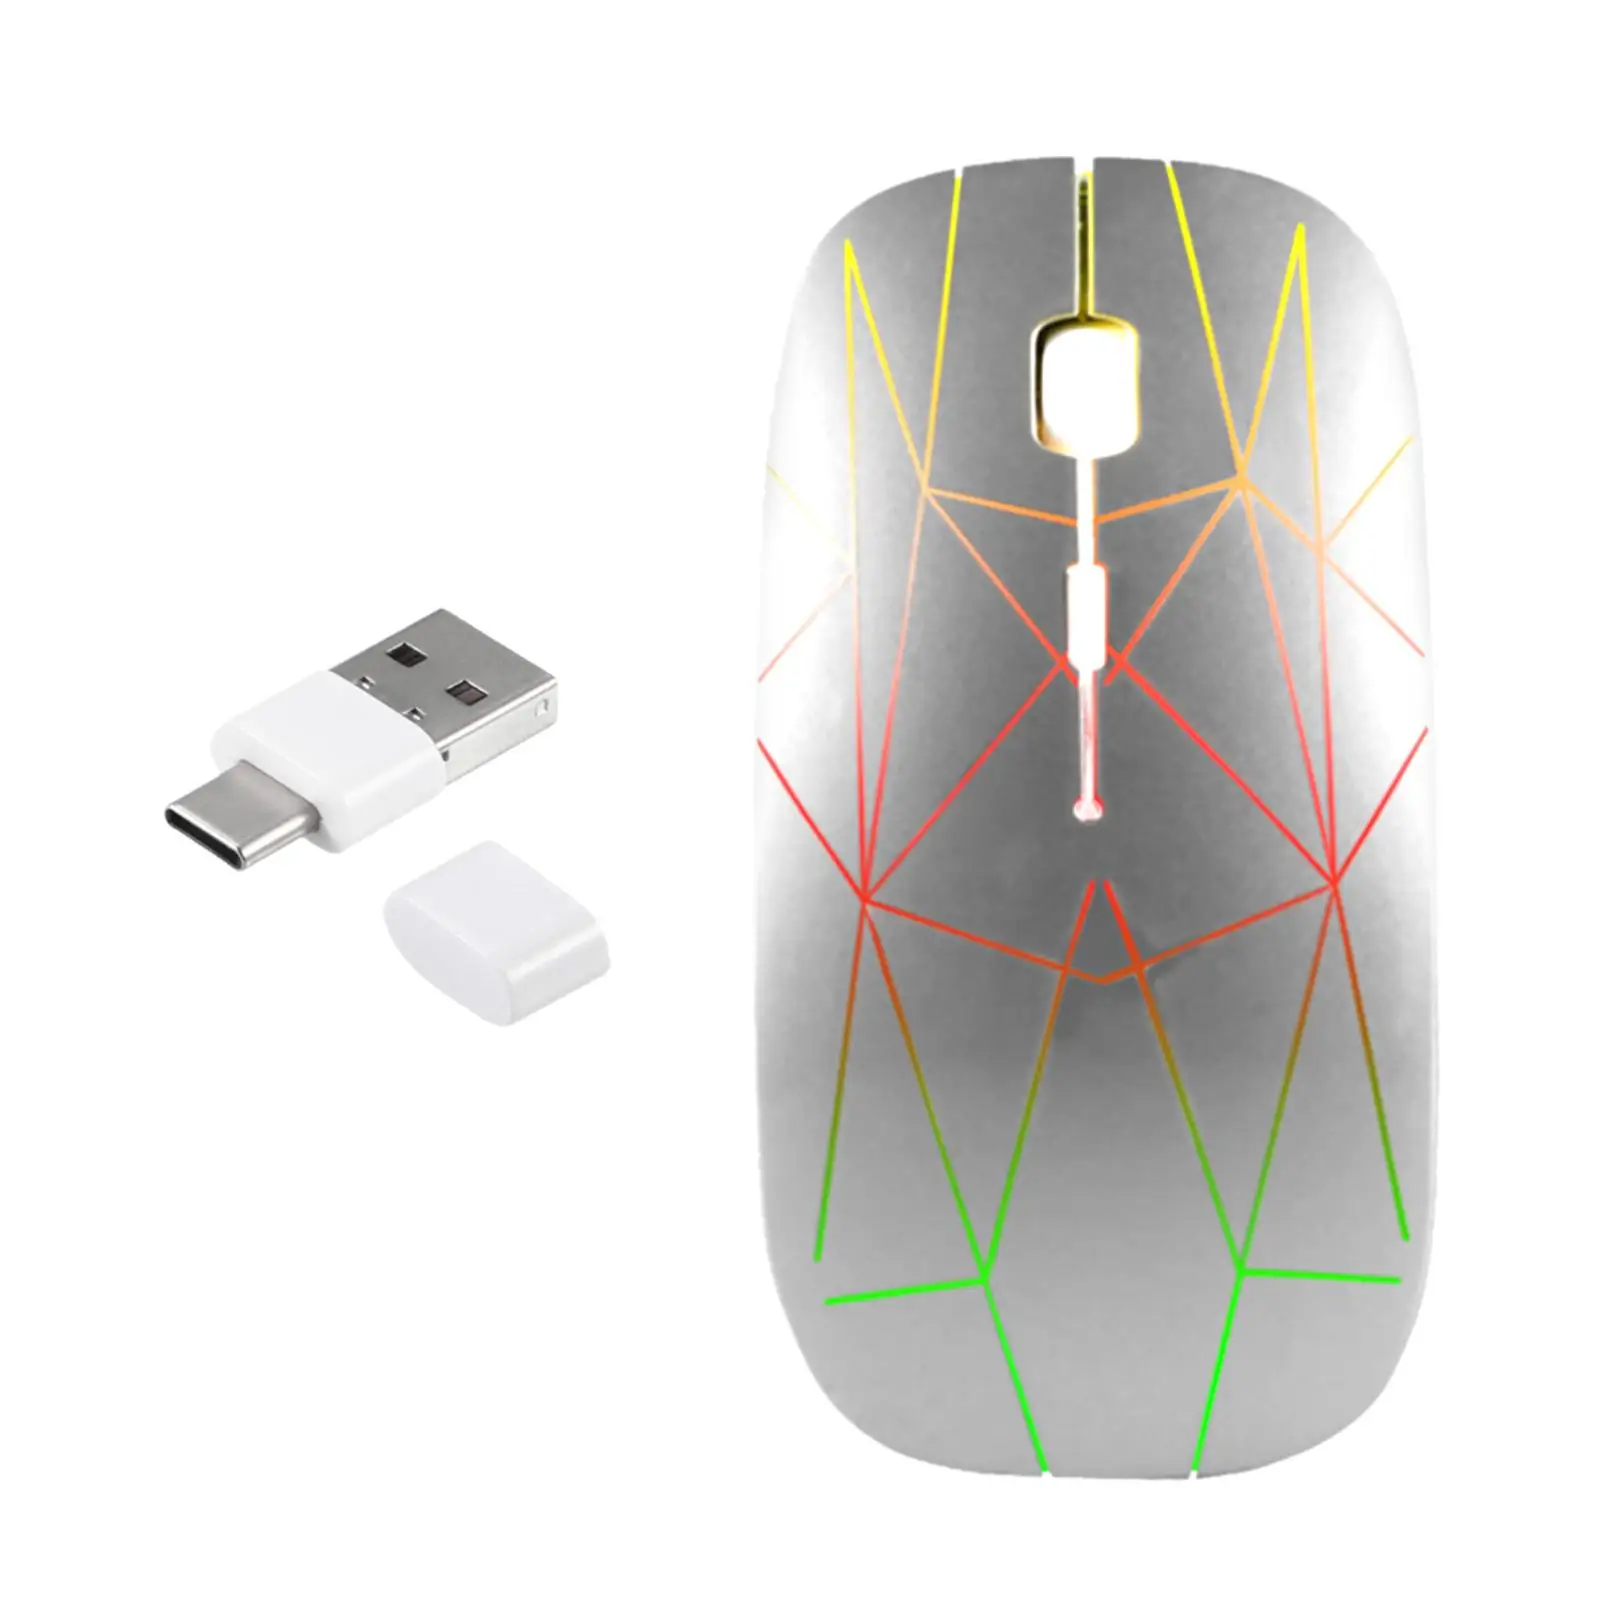 LED Wireless Mouse USB Charging 800 / 1200 /1600 DPI Silent 2.4G LED Breathing Lights Mobile Optical Mouse 4 Buttons for Office